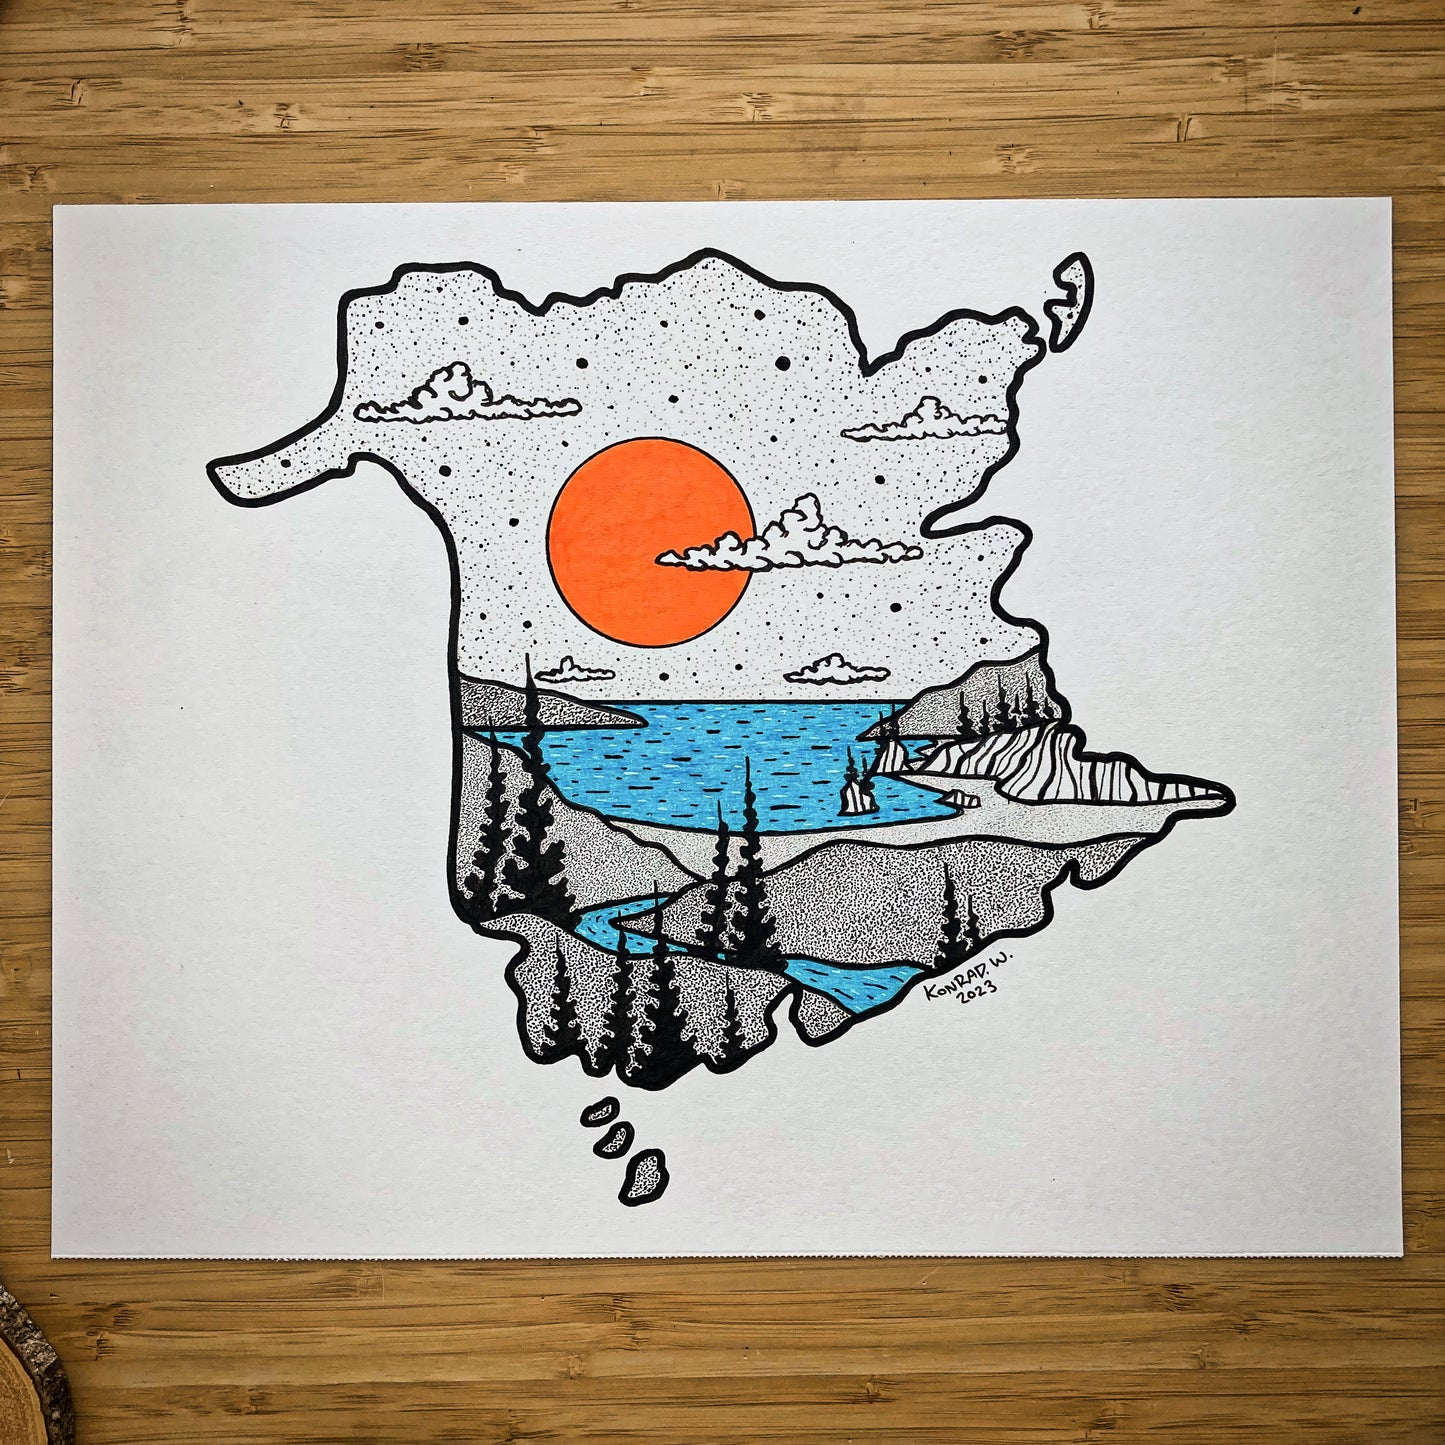 The Province of New Brunswick - 11x14 ORIGINAL Pen and Ink Illustration